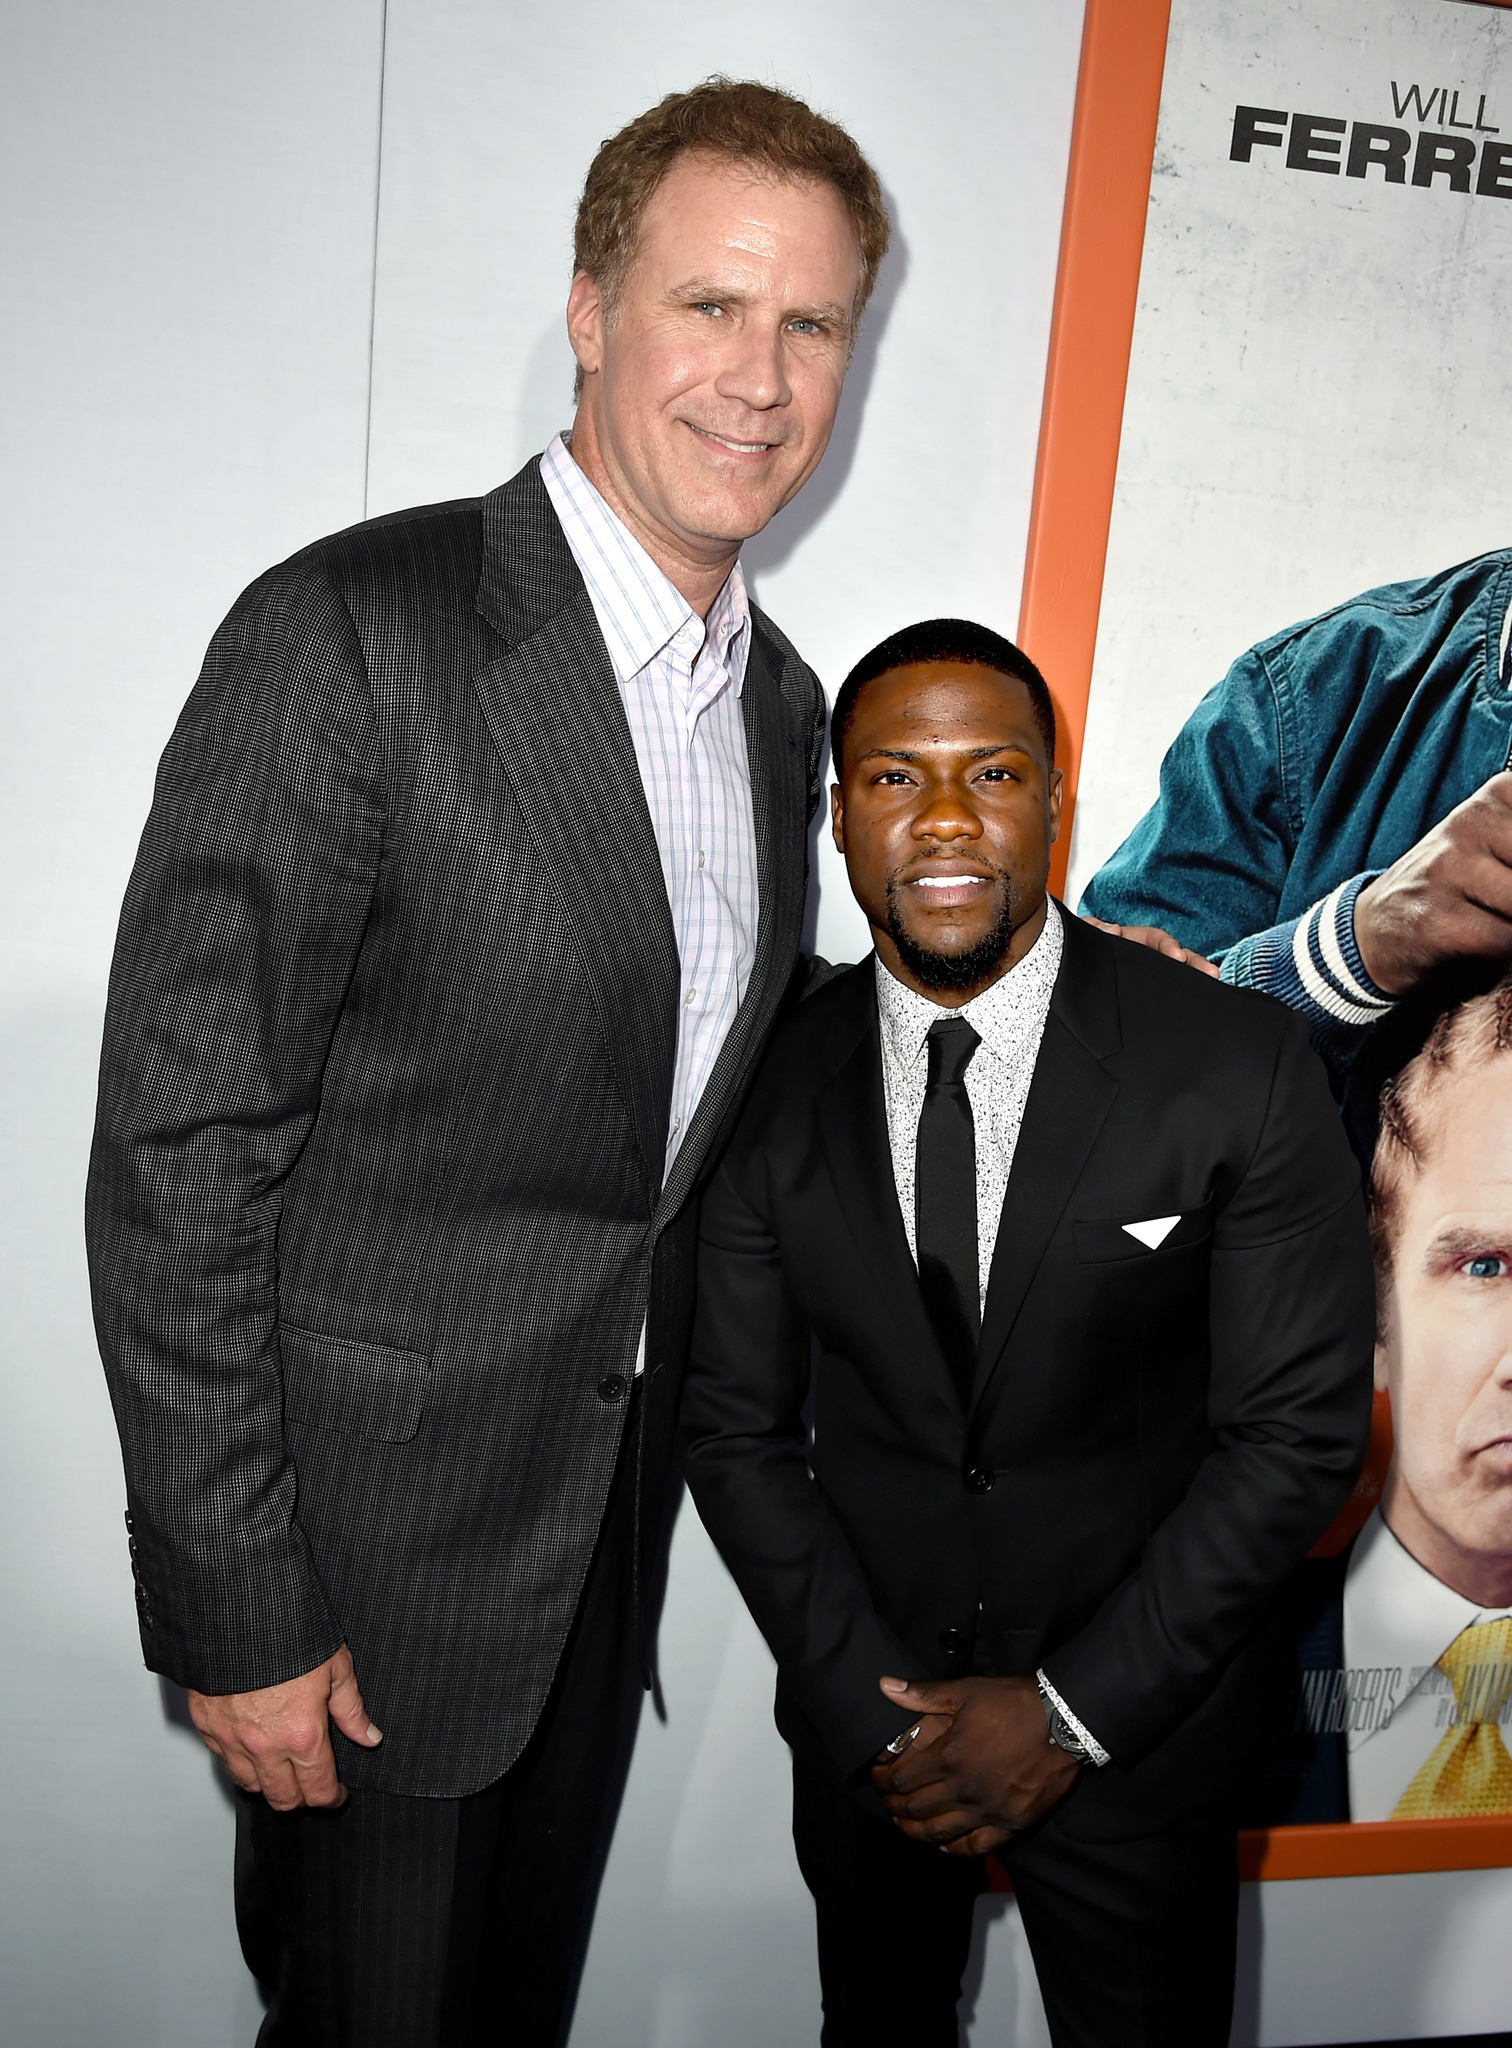 Will Ferrell and Kevin Hart at event of Buk kietas (2015)